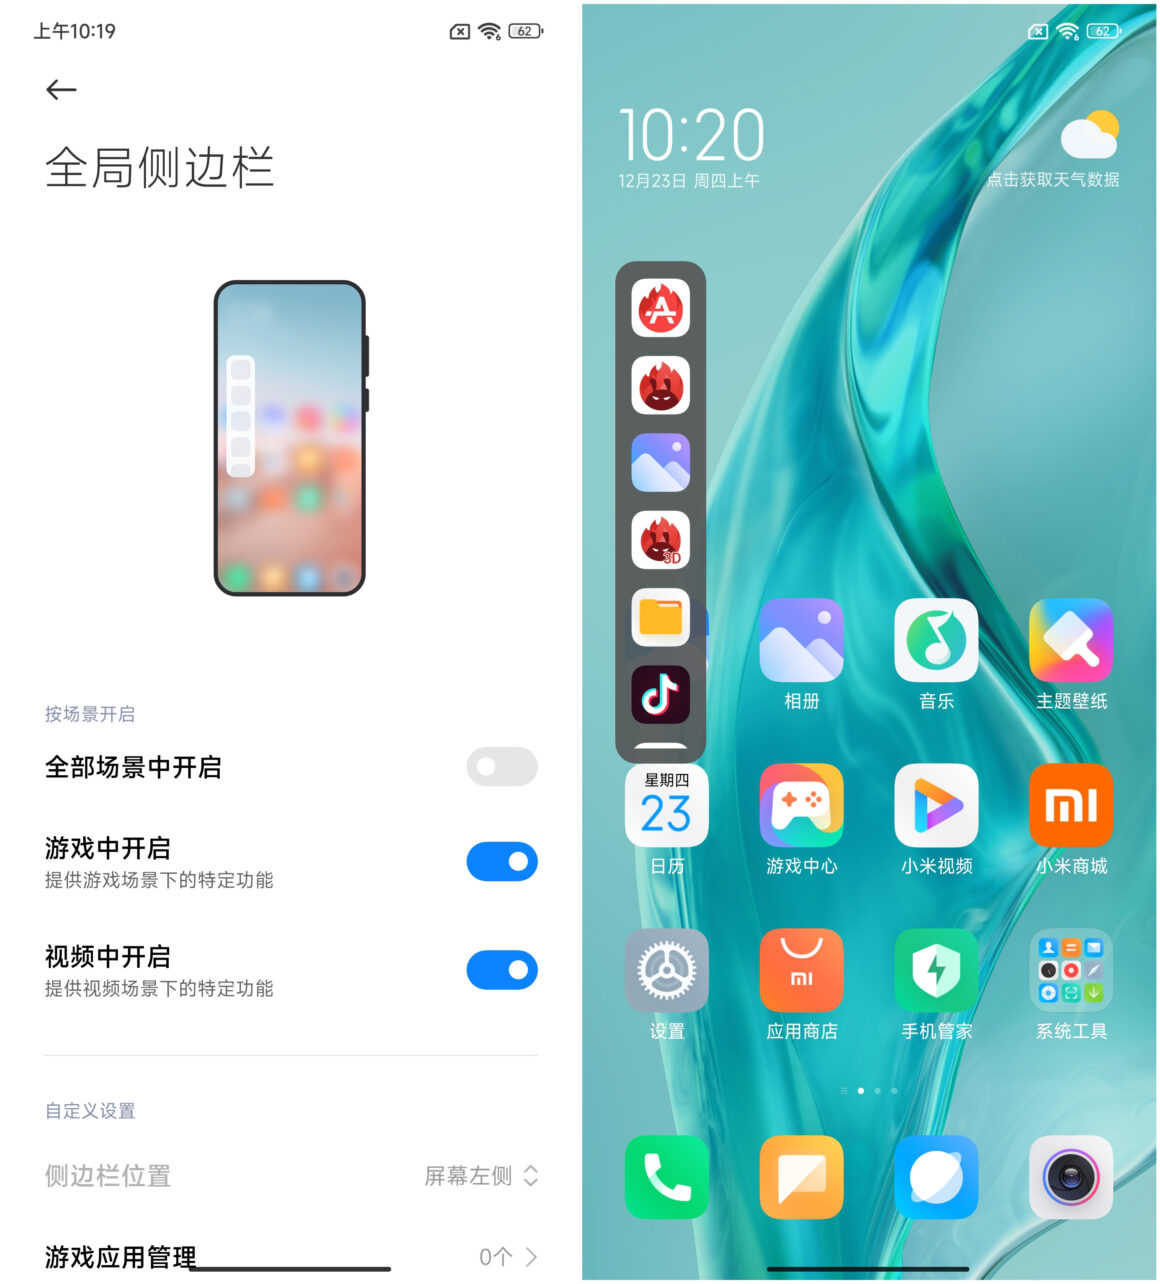 20211229075328 48680 1160x1284 - Xiaomi 12 Pro price, review, and full specs